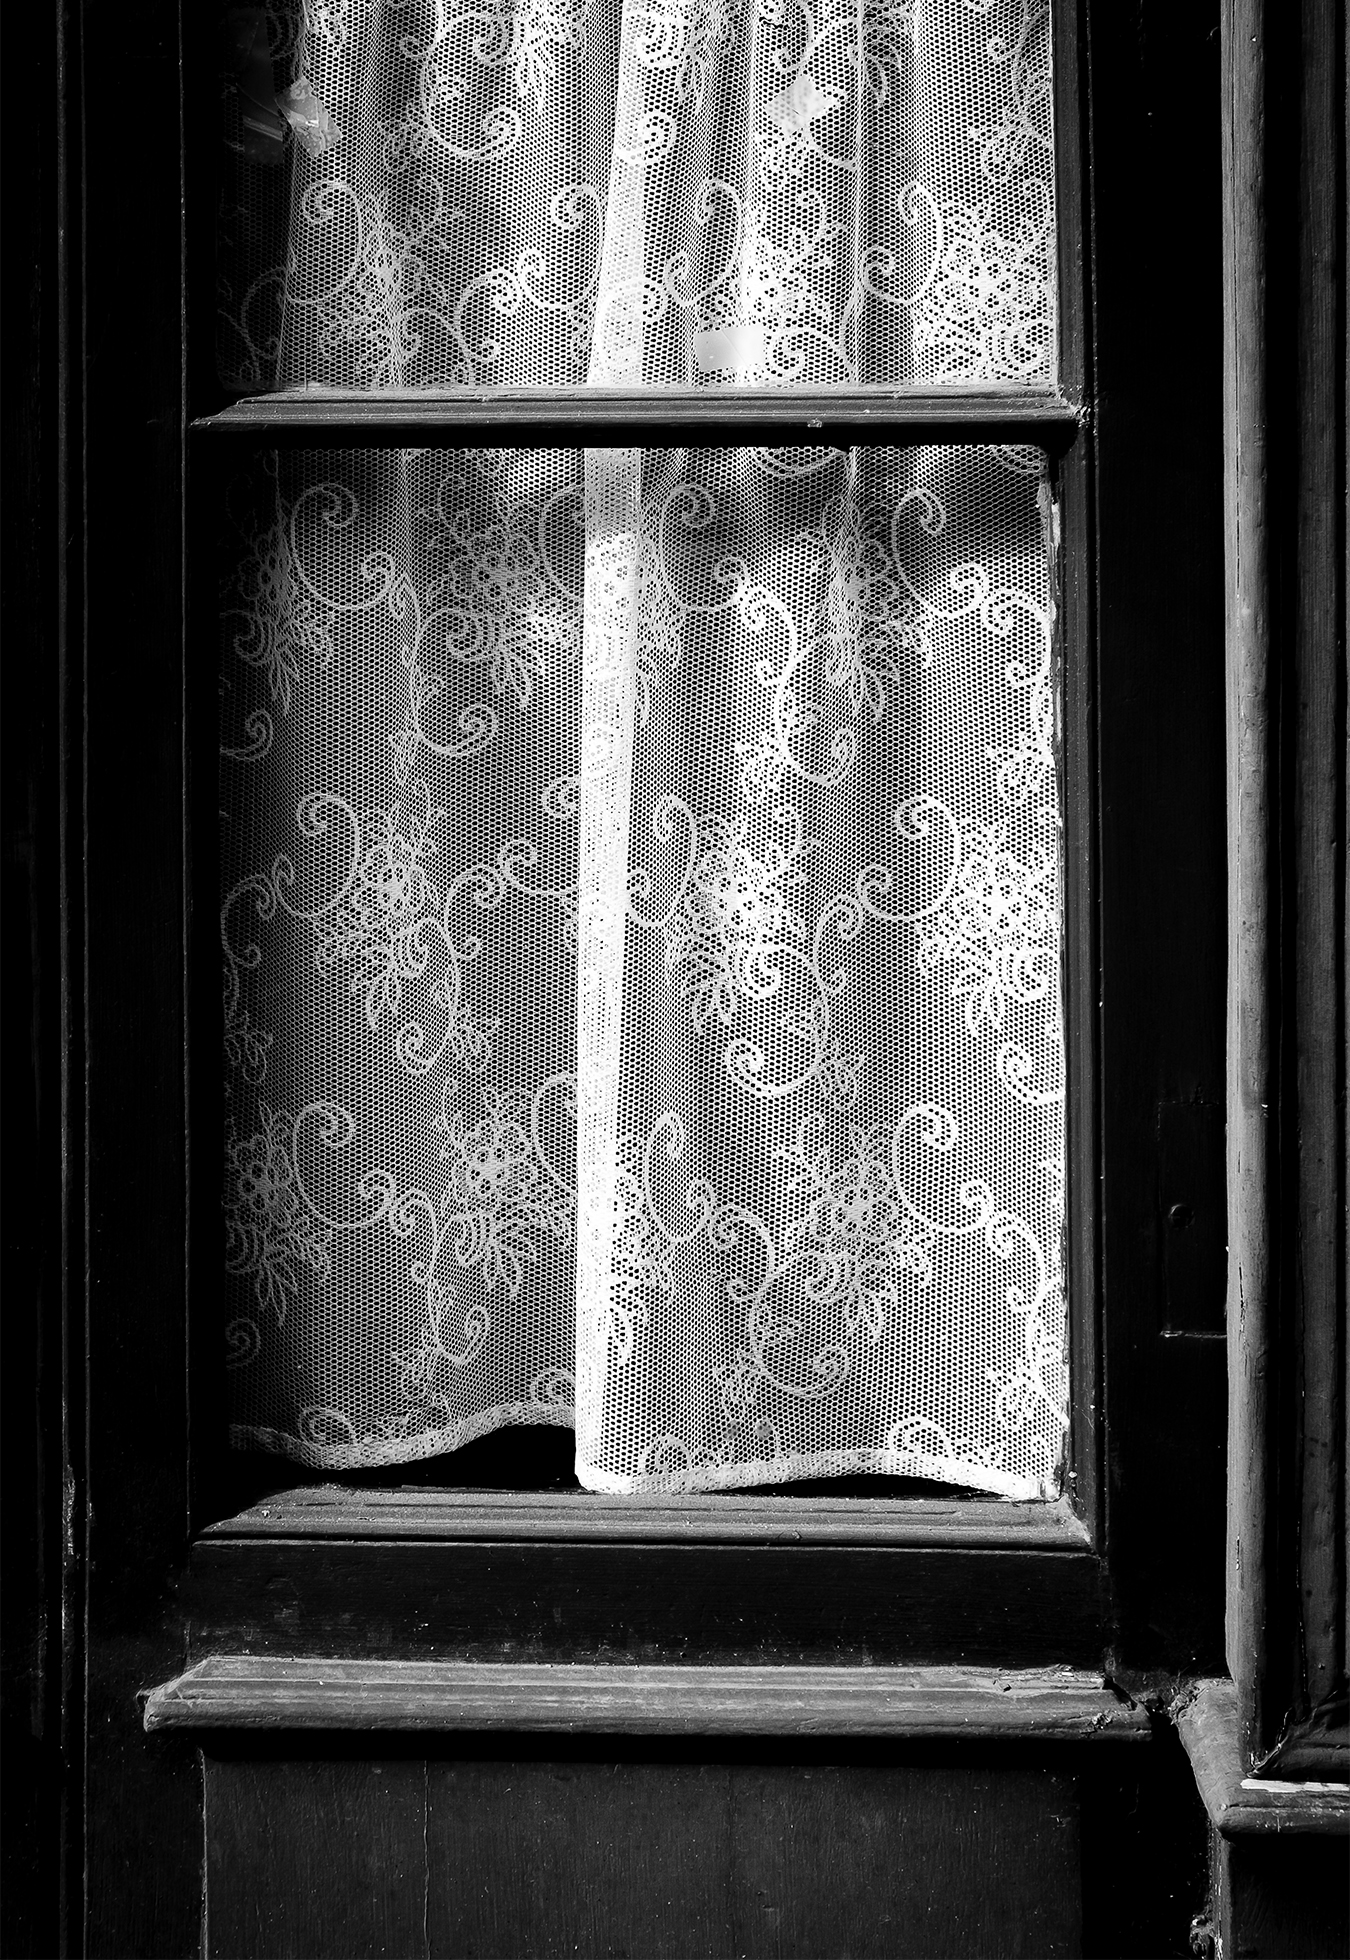 A light-colored, gauzy curtain stitched with a flowered motif behind a pane and a half of a dark-framed window.